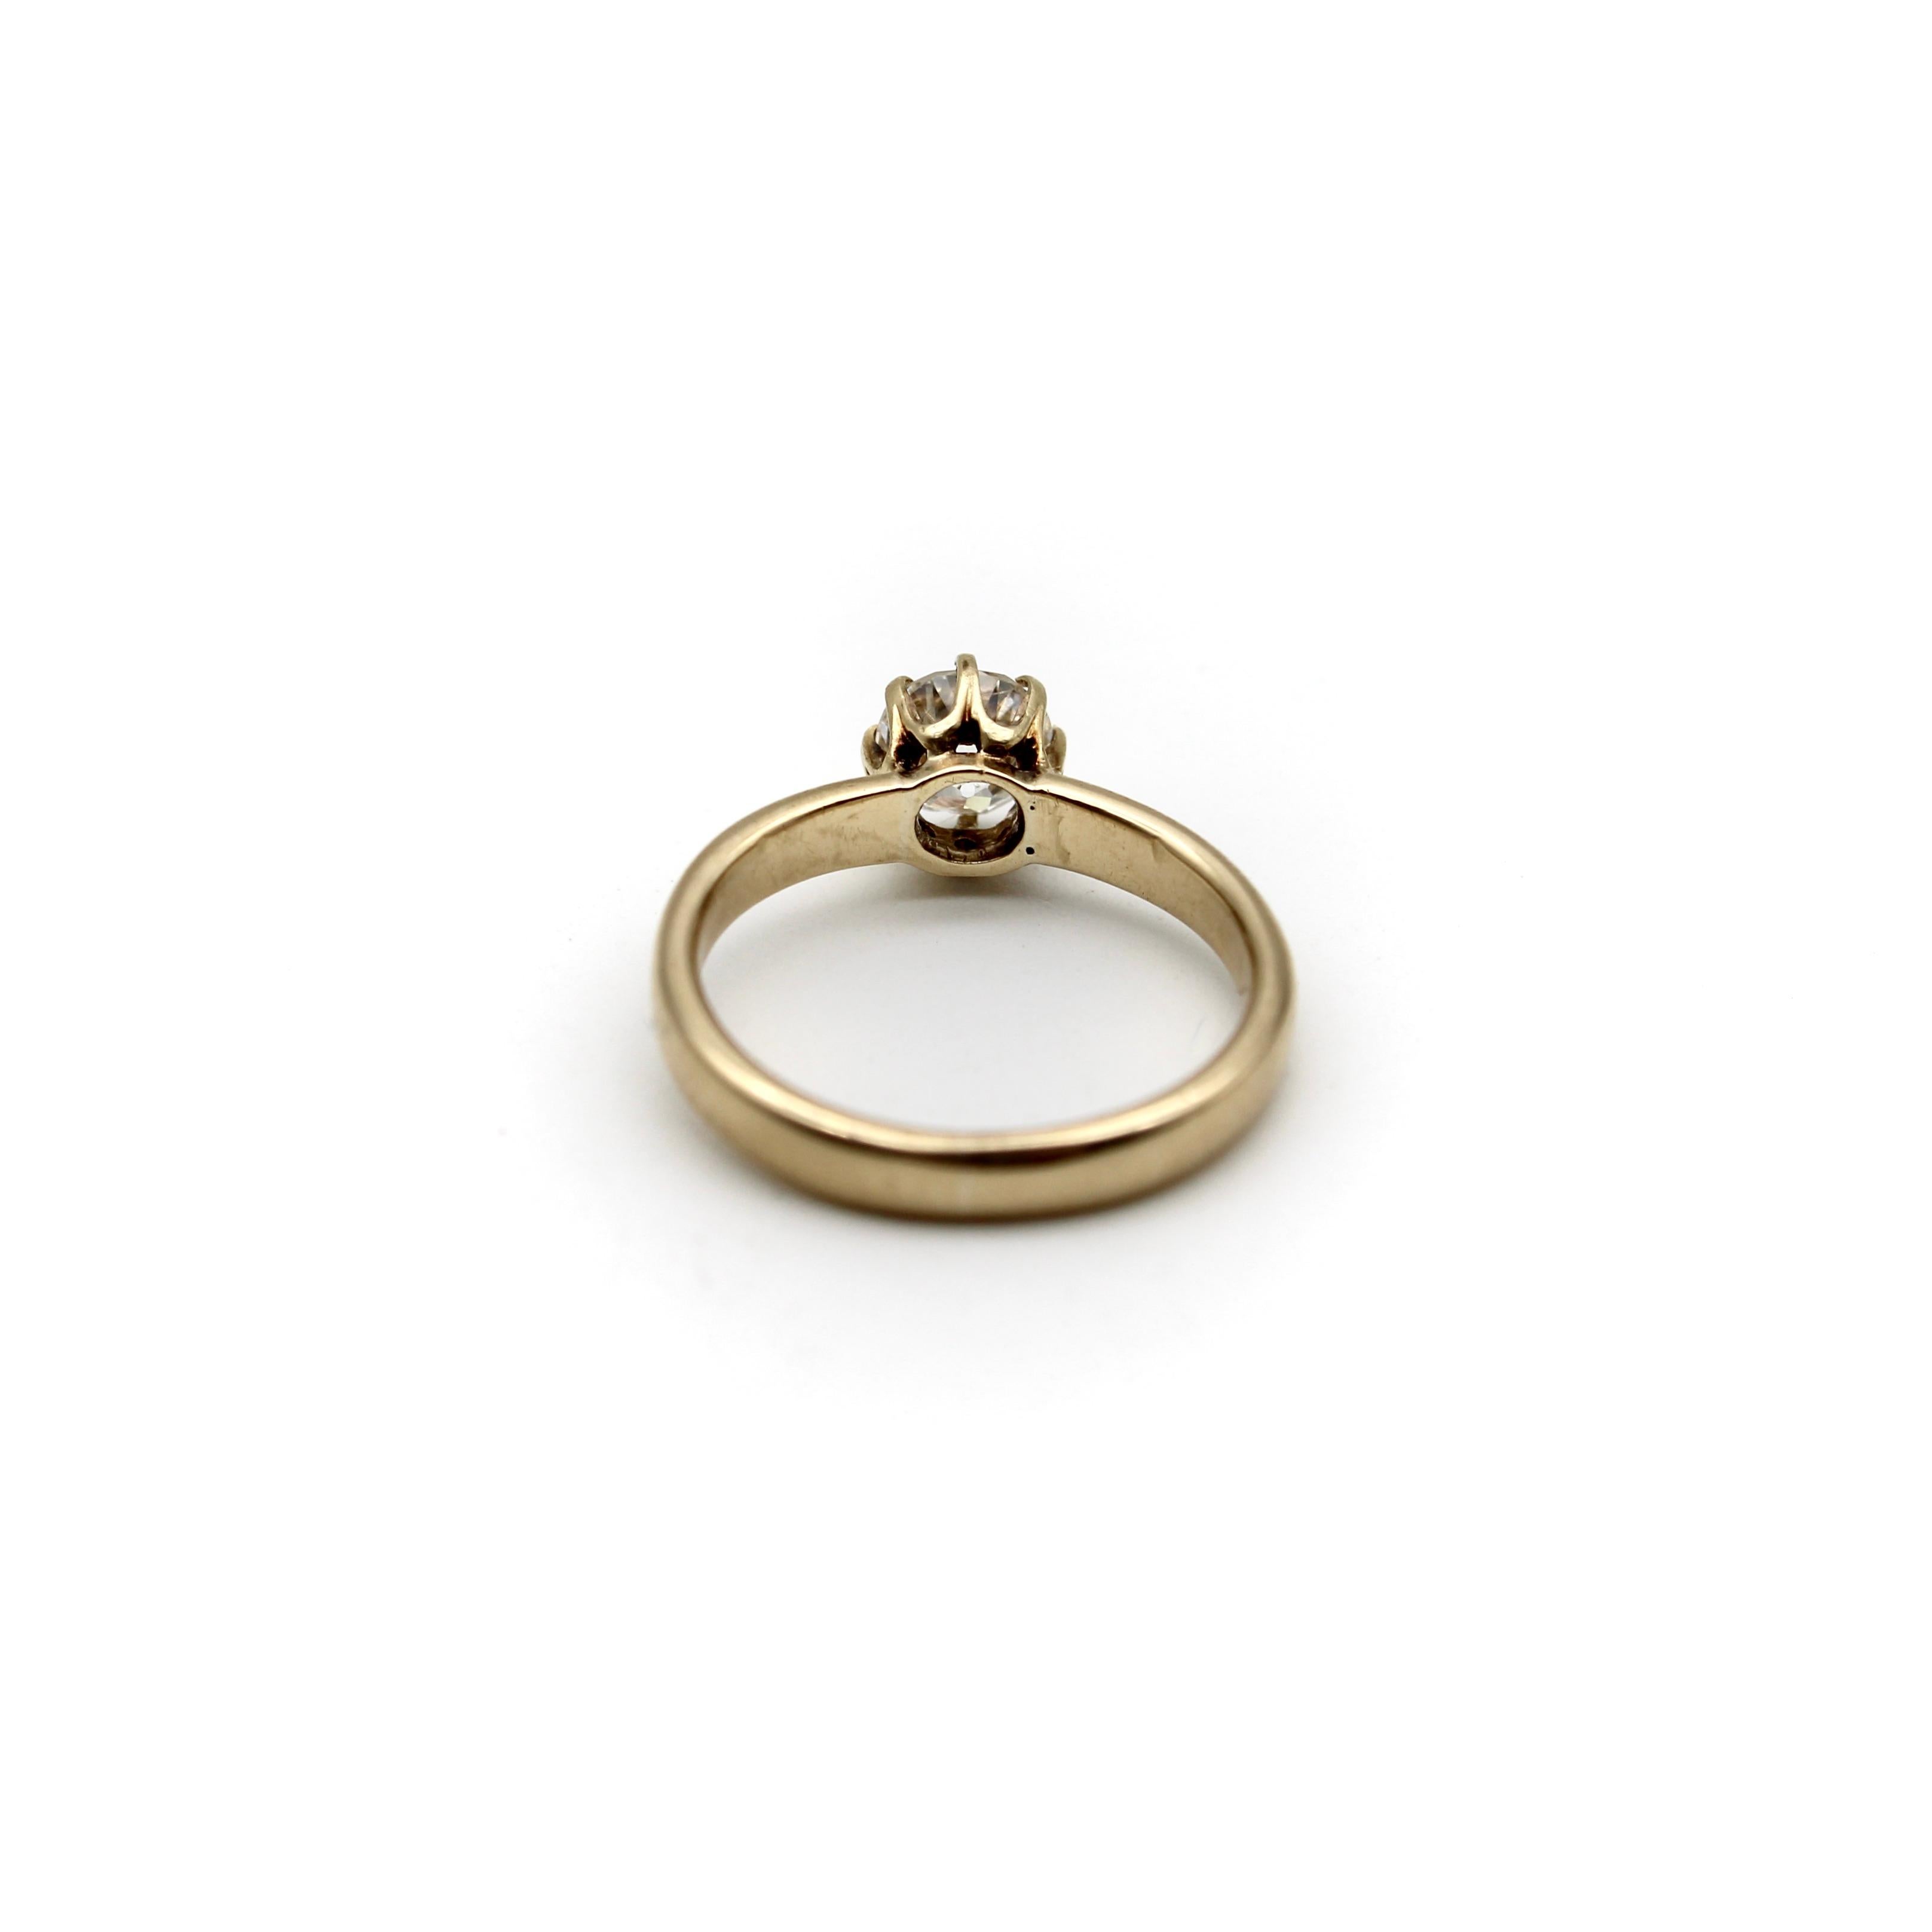 An original engagement ring from the Victorian period, this 14k gold Old European Cut diamond ring dates to about 1890. The diamond is set in an elegant basket, with eight prongs holding the stone in place. Stunning in its simplicity, this ring is